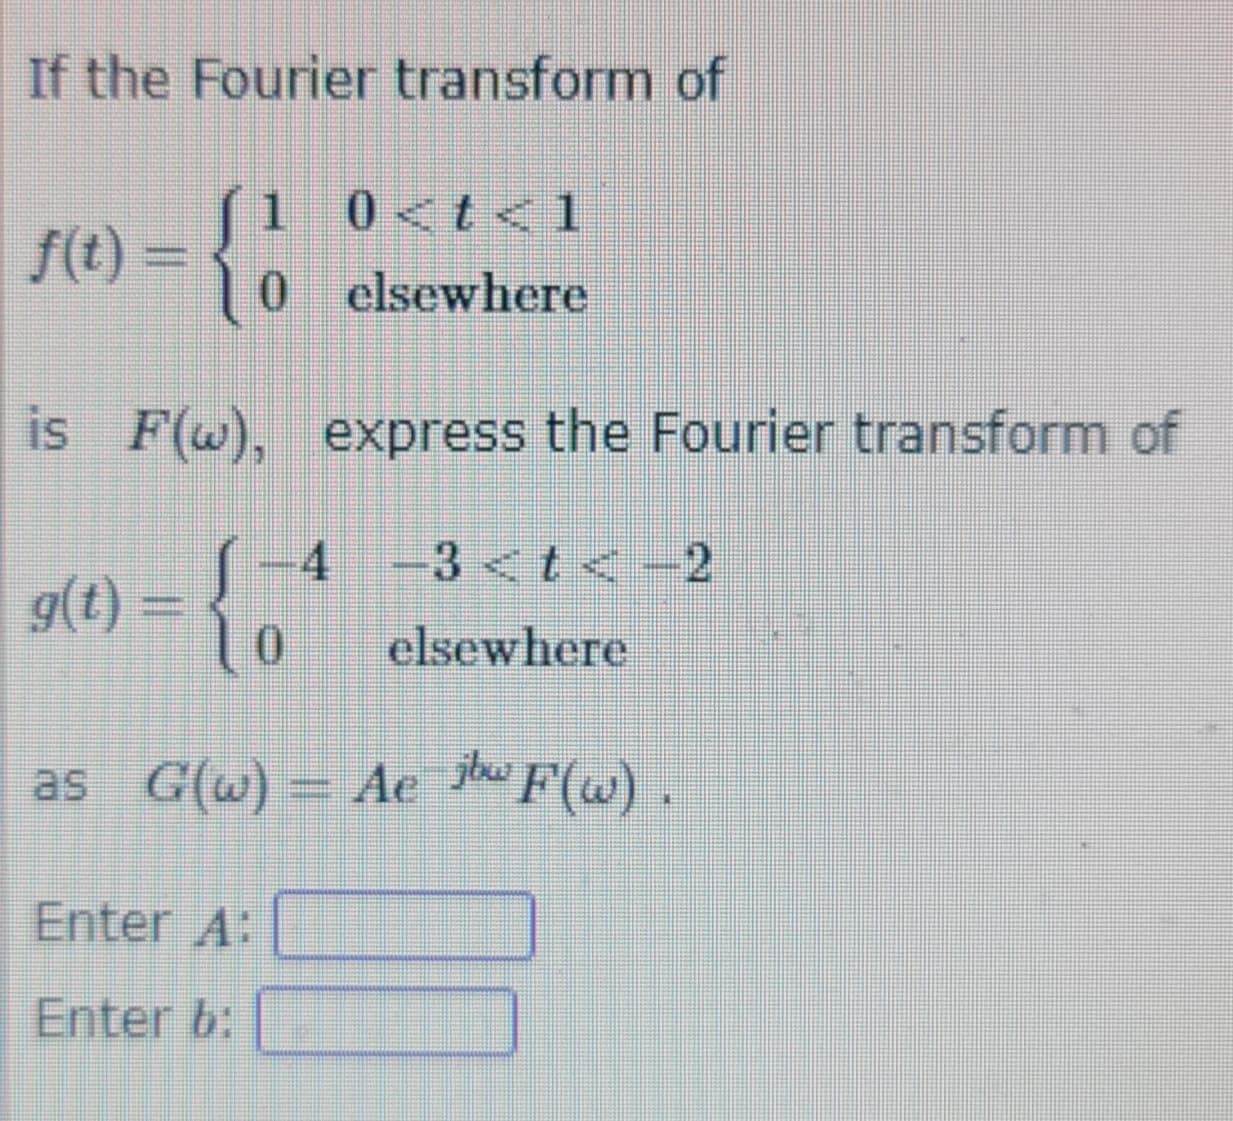 If the Fourier transform of
f(t) =
is F(w), express the Fourier transform of
S 4 -3 <t< -2
10
elsewhere
as G(w) = Ae jw F(w).
g(t) =
1 0<t< 1
0 elsewhere
Enter A:
Enter b: